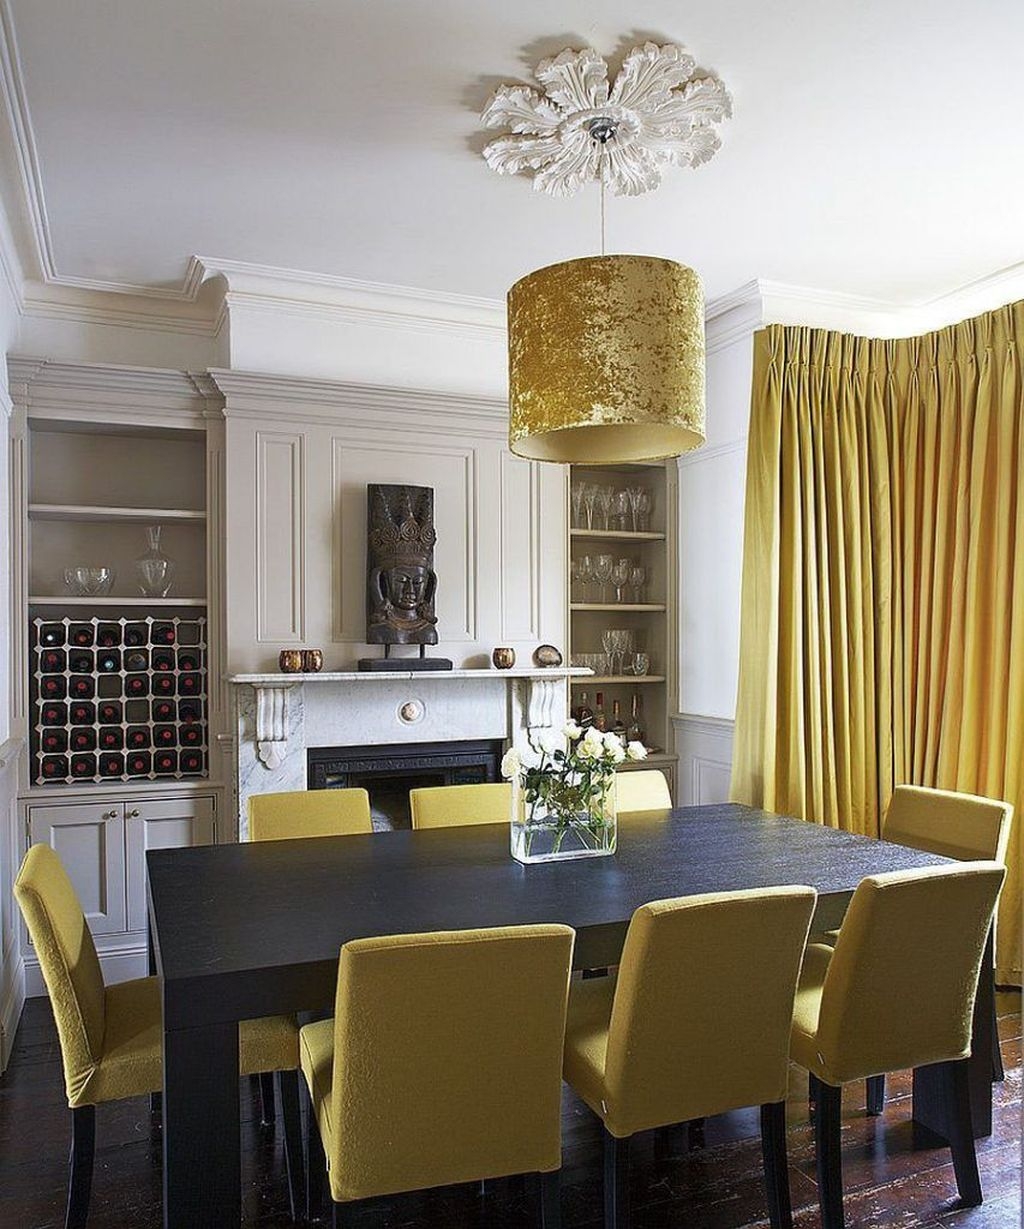 46 Luxurious Black And Gold Dining Room Ideas For Inspiration - BESTHOMISH